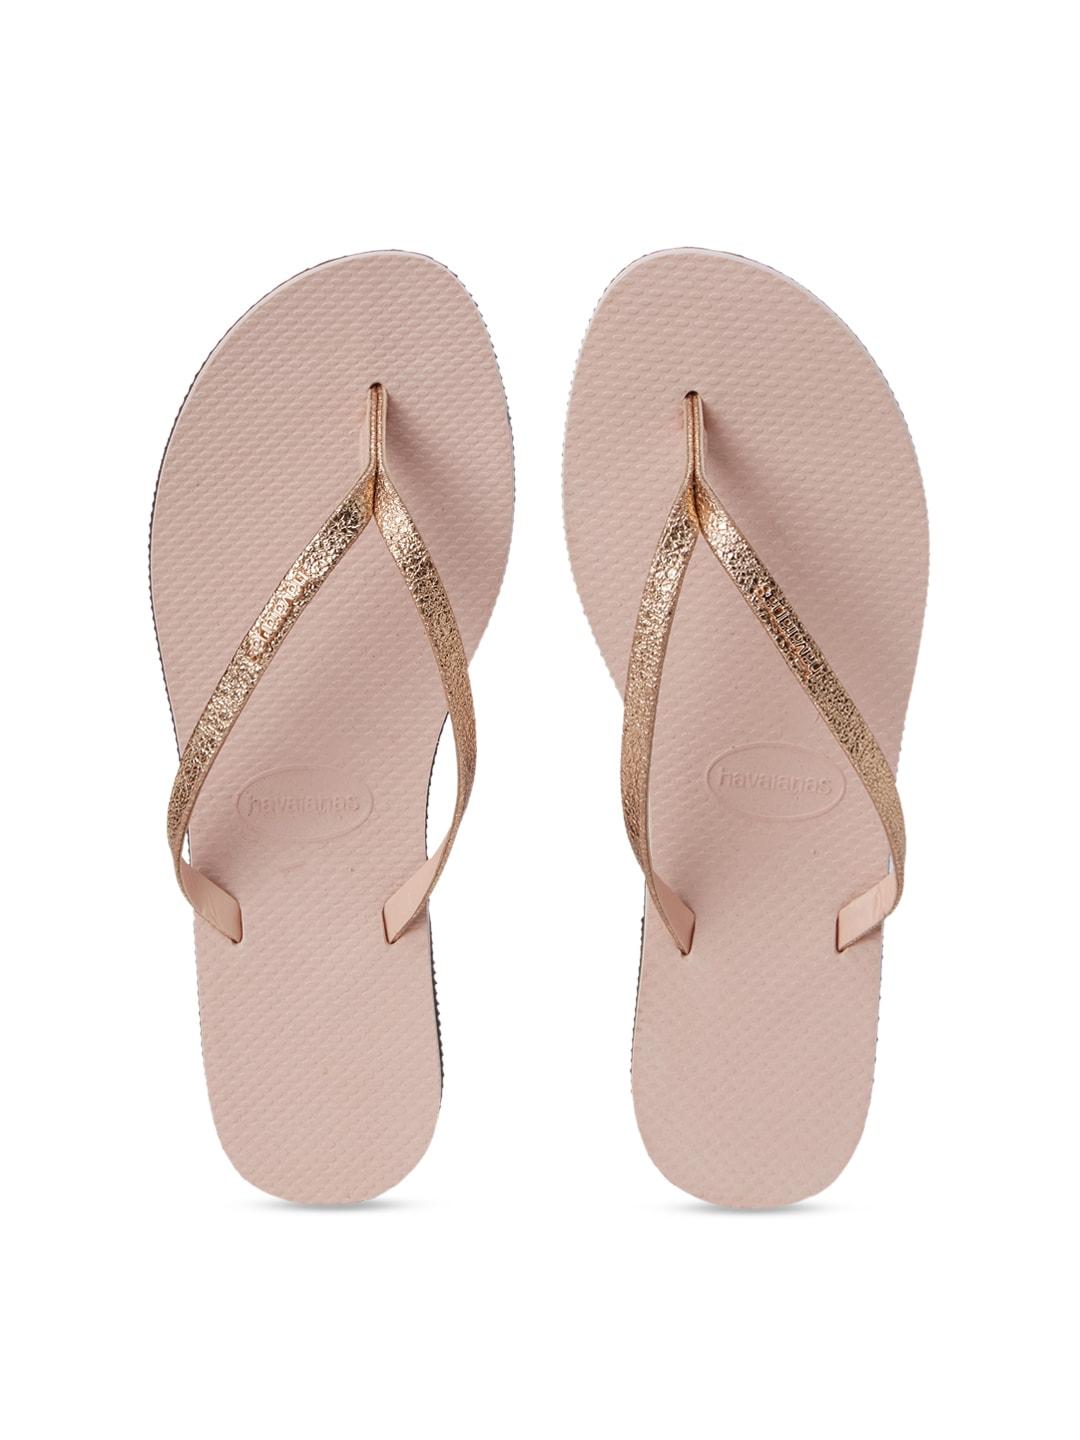 havaianas-women-rose-gold-coloured-solid-thong-flip-flops